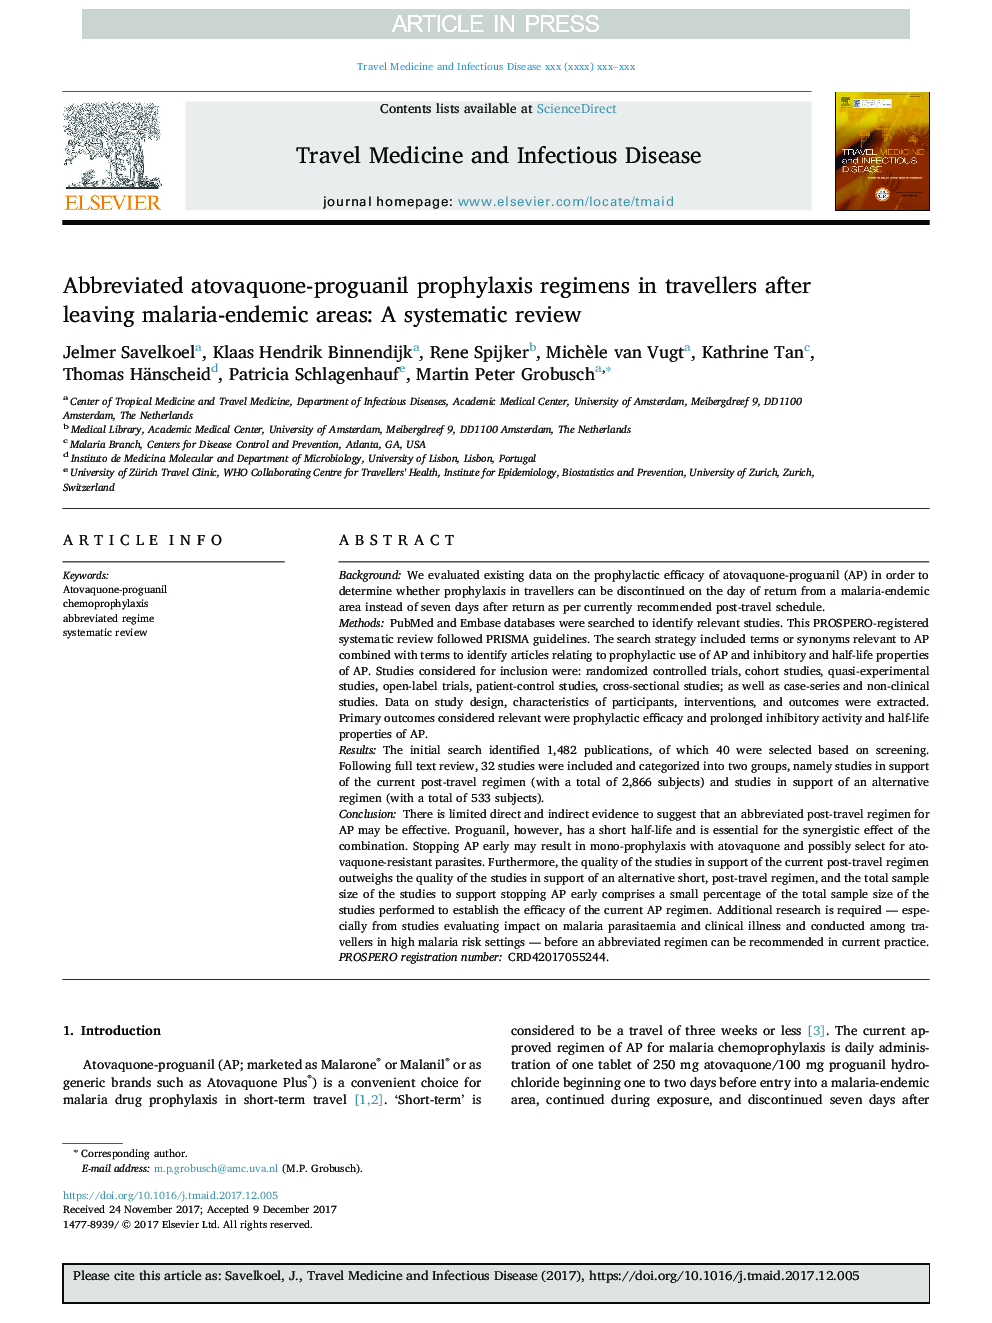 Abbreviated atovaquone-proguanil prophylaxis regimens in travellers after leaving malaria-endemic areas: A systematic review